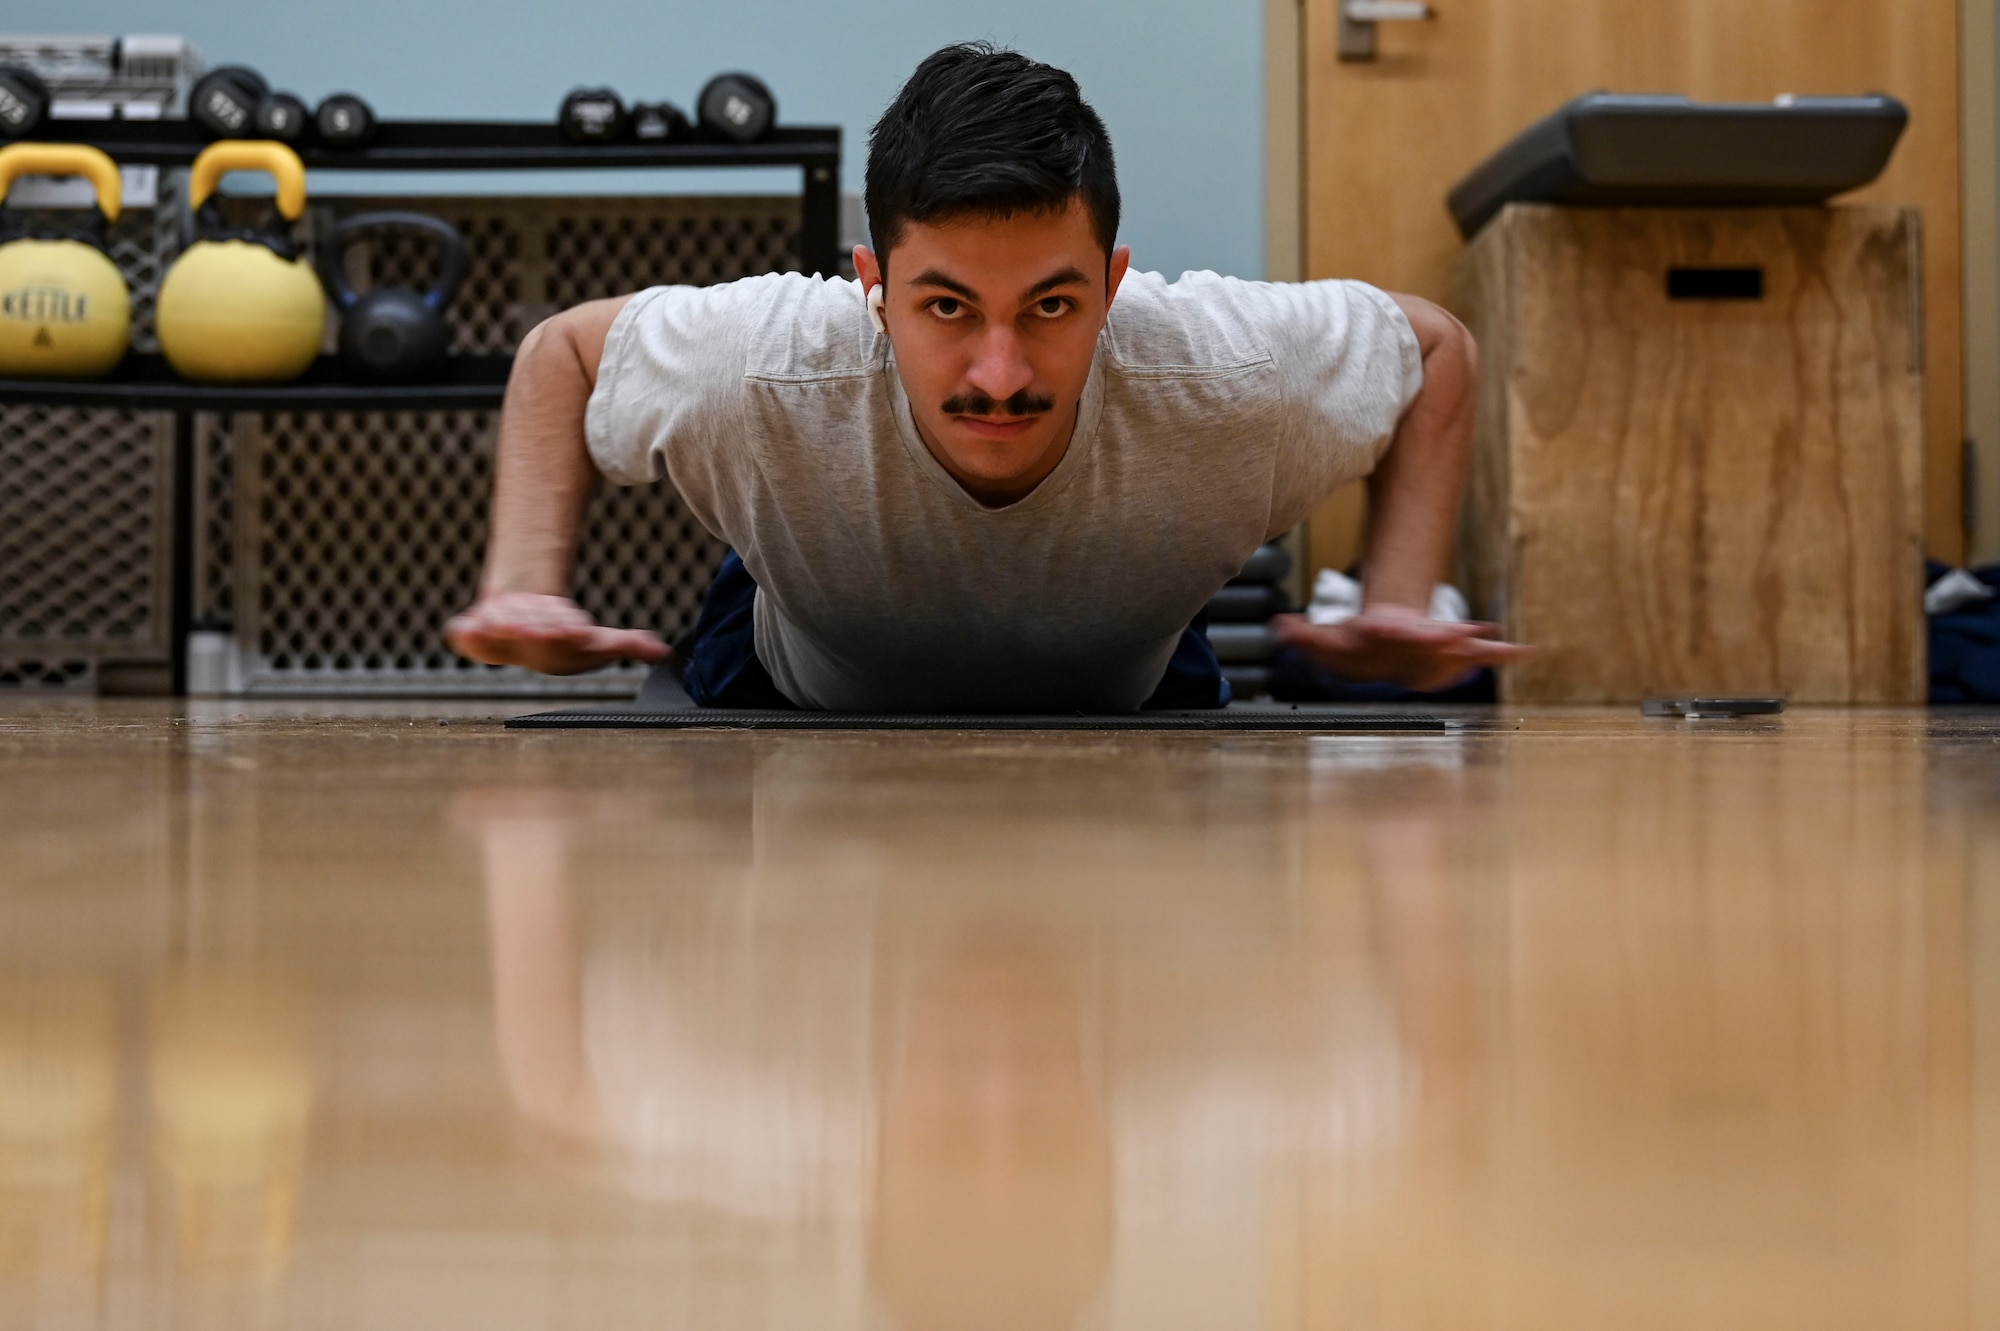 Airman completes hand release push-ups